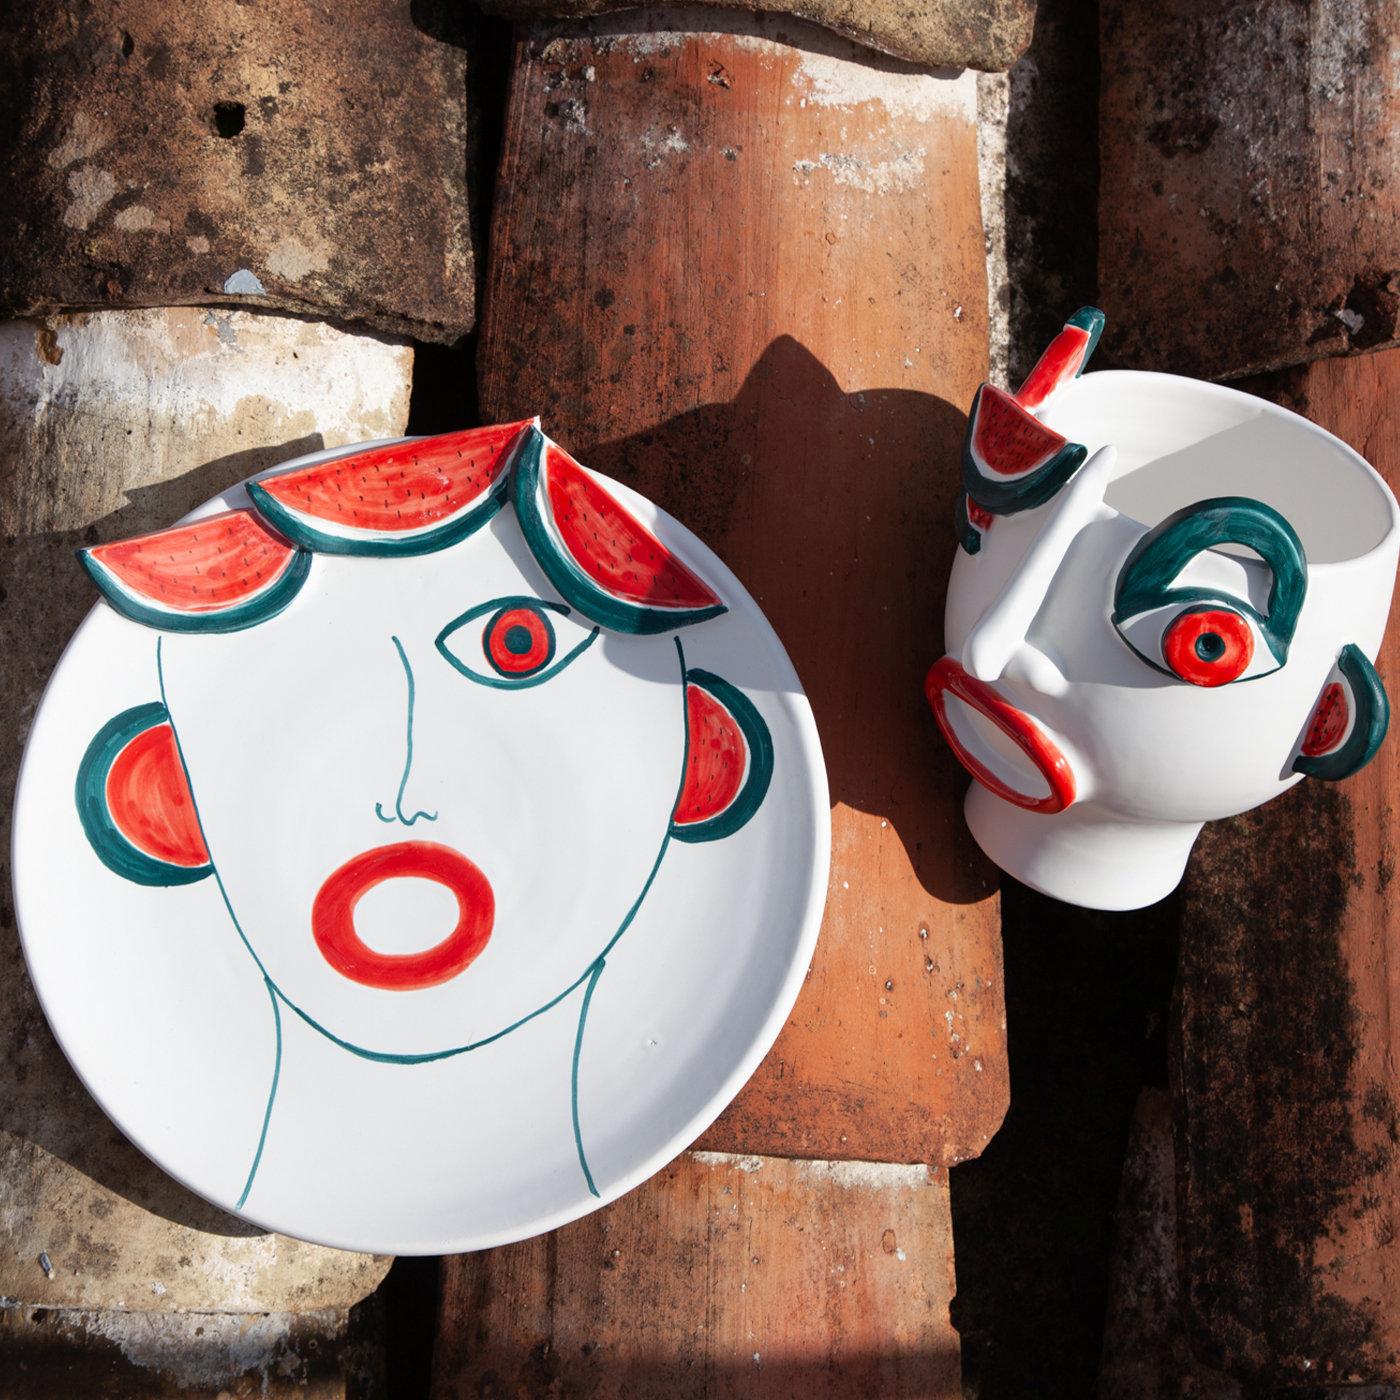 Master ceramist Patrizia Italiano drew inspiration from Sicilian local market sellers for her one-off series of stunning anthropomorphic ceramic vessels. Playful and intense, this head-shaped vase depicts Riccardo - street watermelon vendor - as